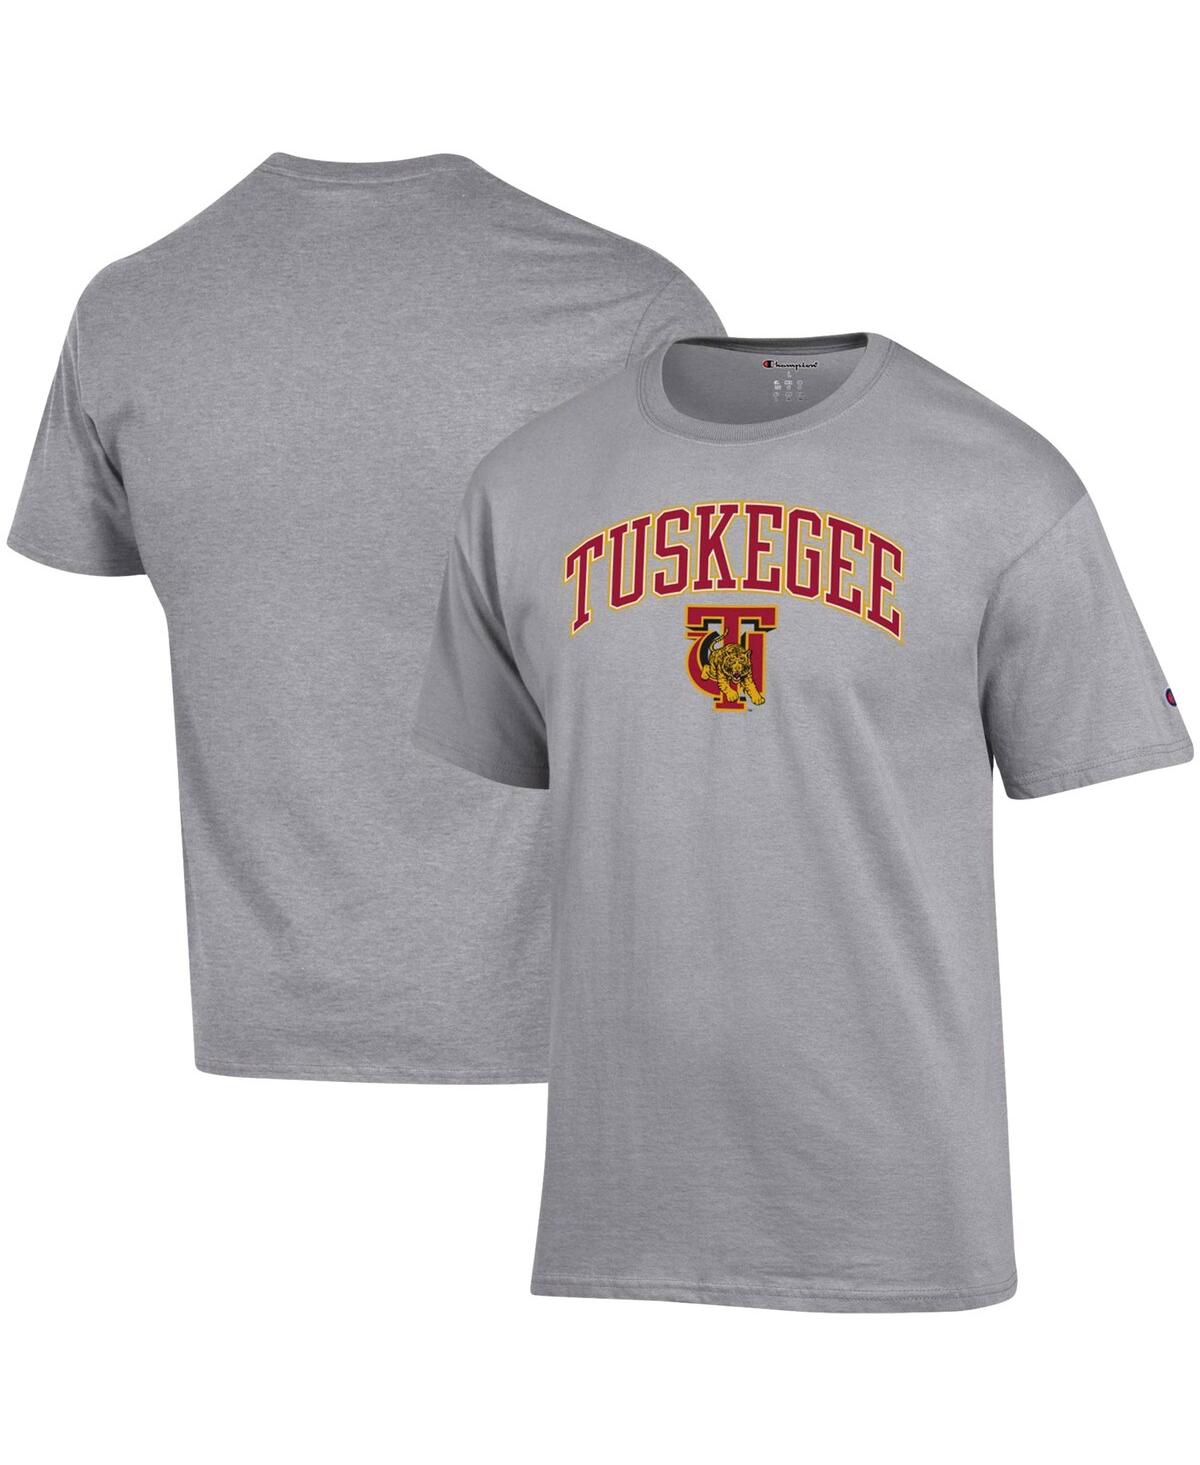 Champion Men's  Gray Tuskegee Golden Tigers Arch Over Logo T-shirt